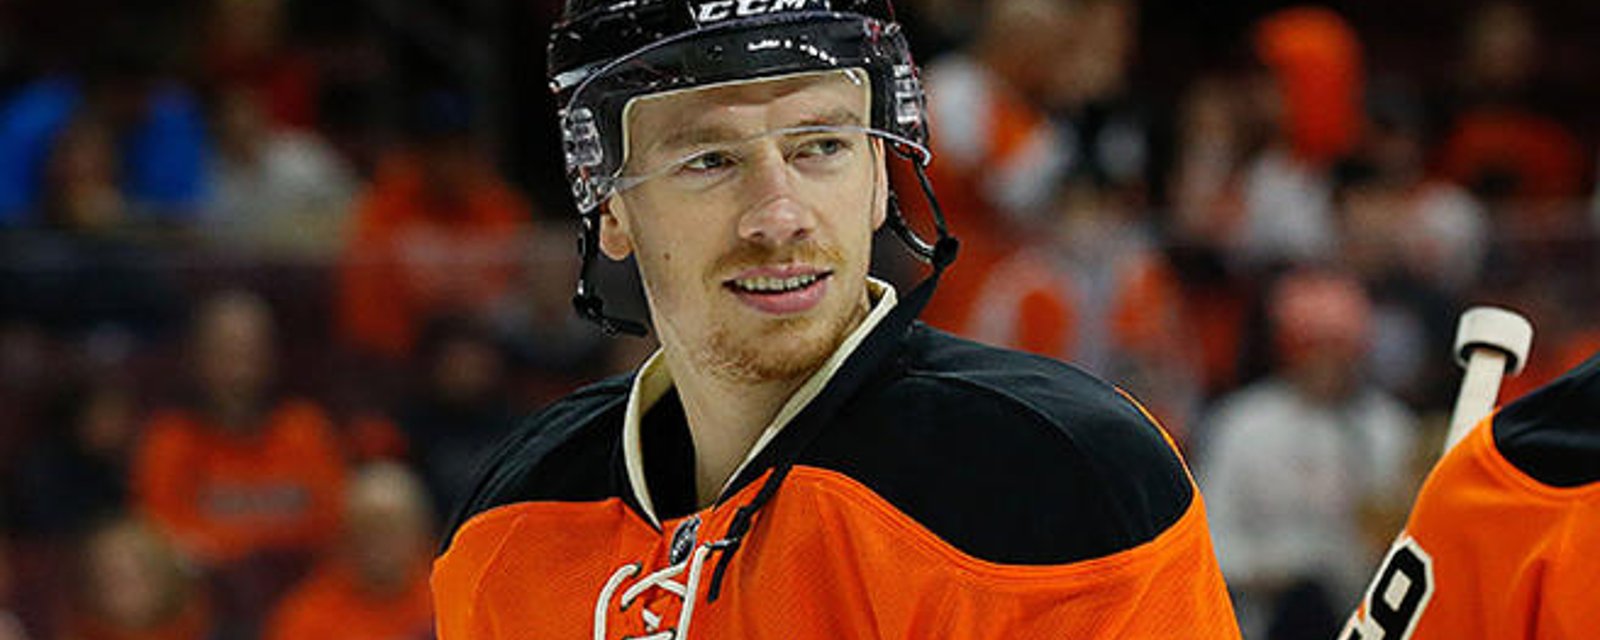 Breaking: Flyers sign forward Raffl to extension 